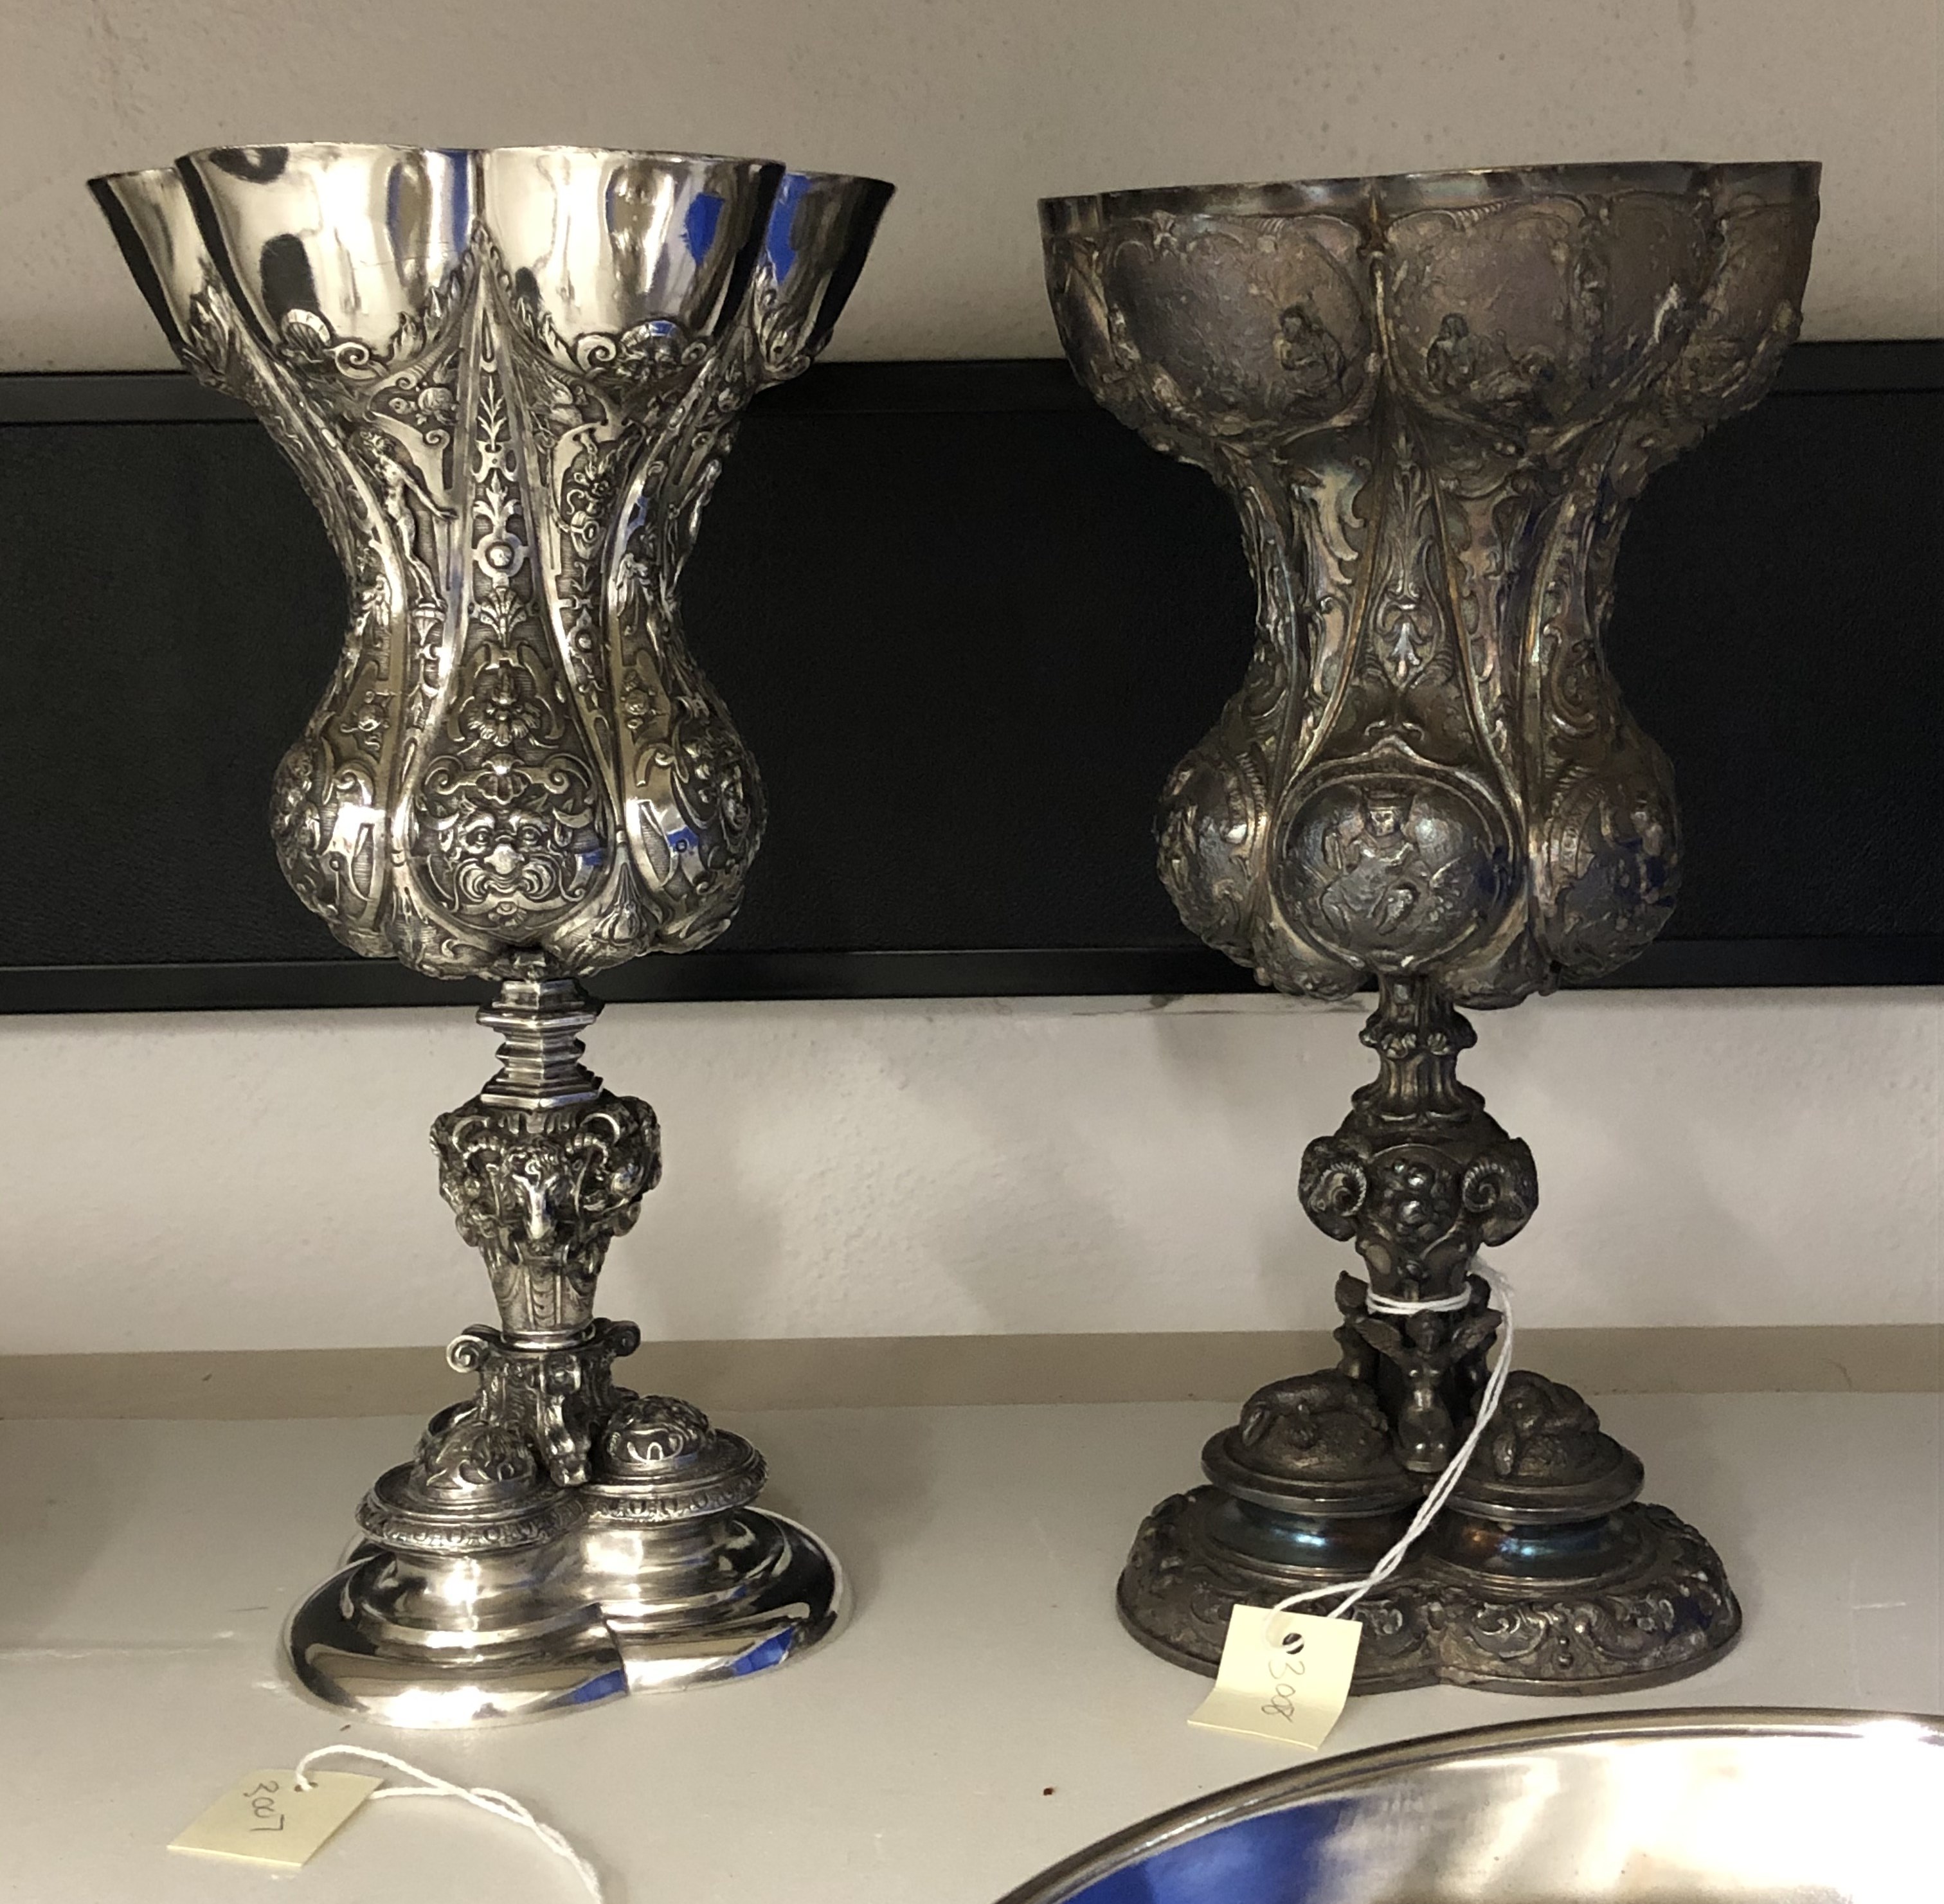 Two metal goblets side by side. The one on the left is polished and silver in colour, while the one on the right is heavily tarnished.